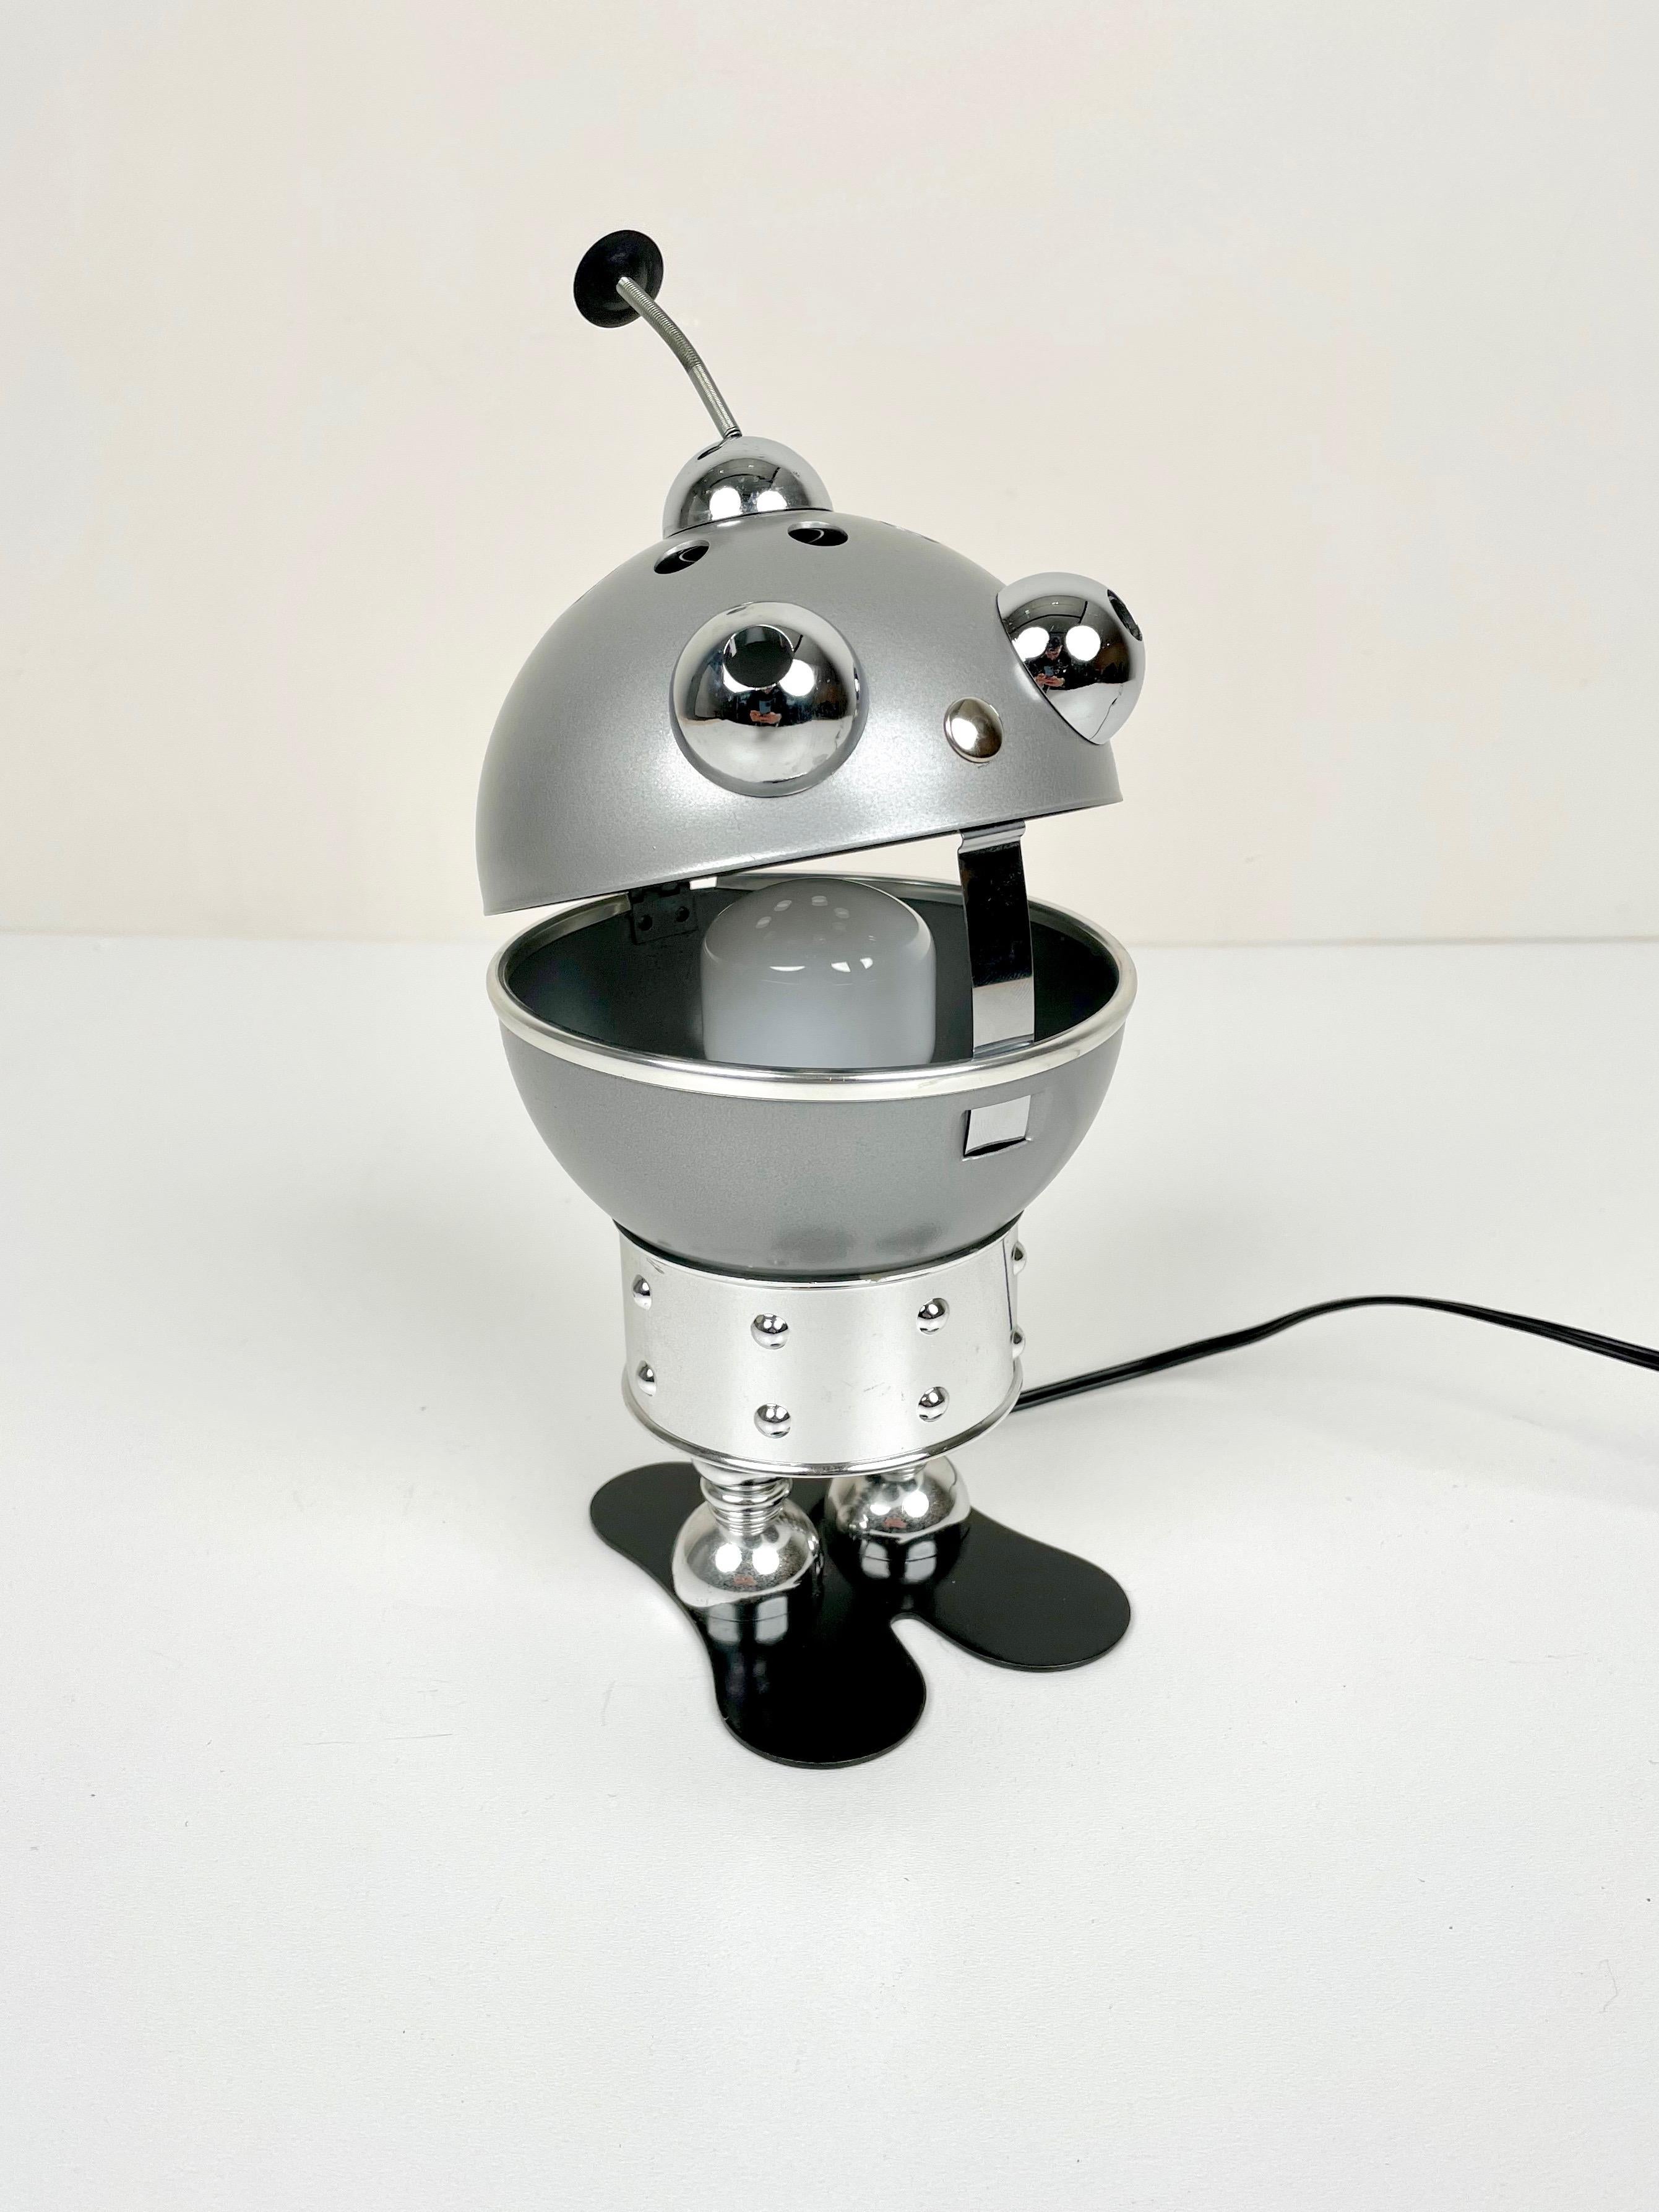 This adorable little robot lamp from the Space Age (1970s) is made of chrome and aluminum. The light comes from its mouth: it makes more or less light depending on the opening of the mouth.